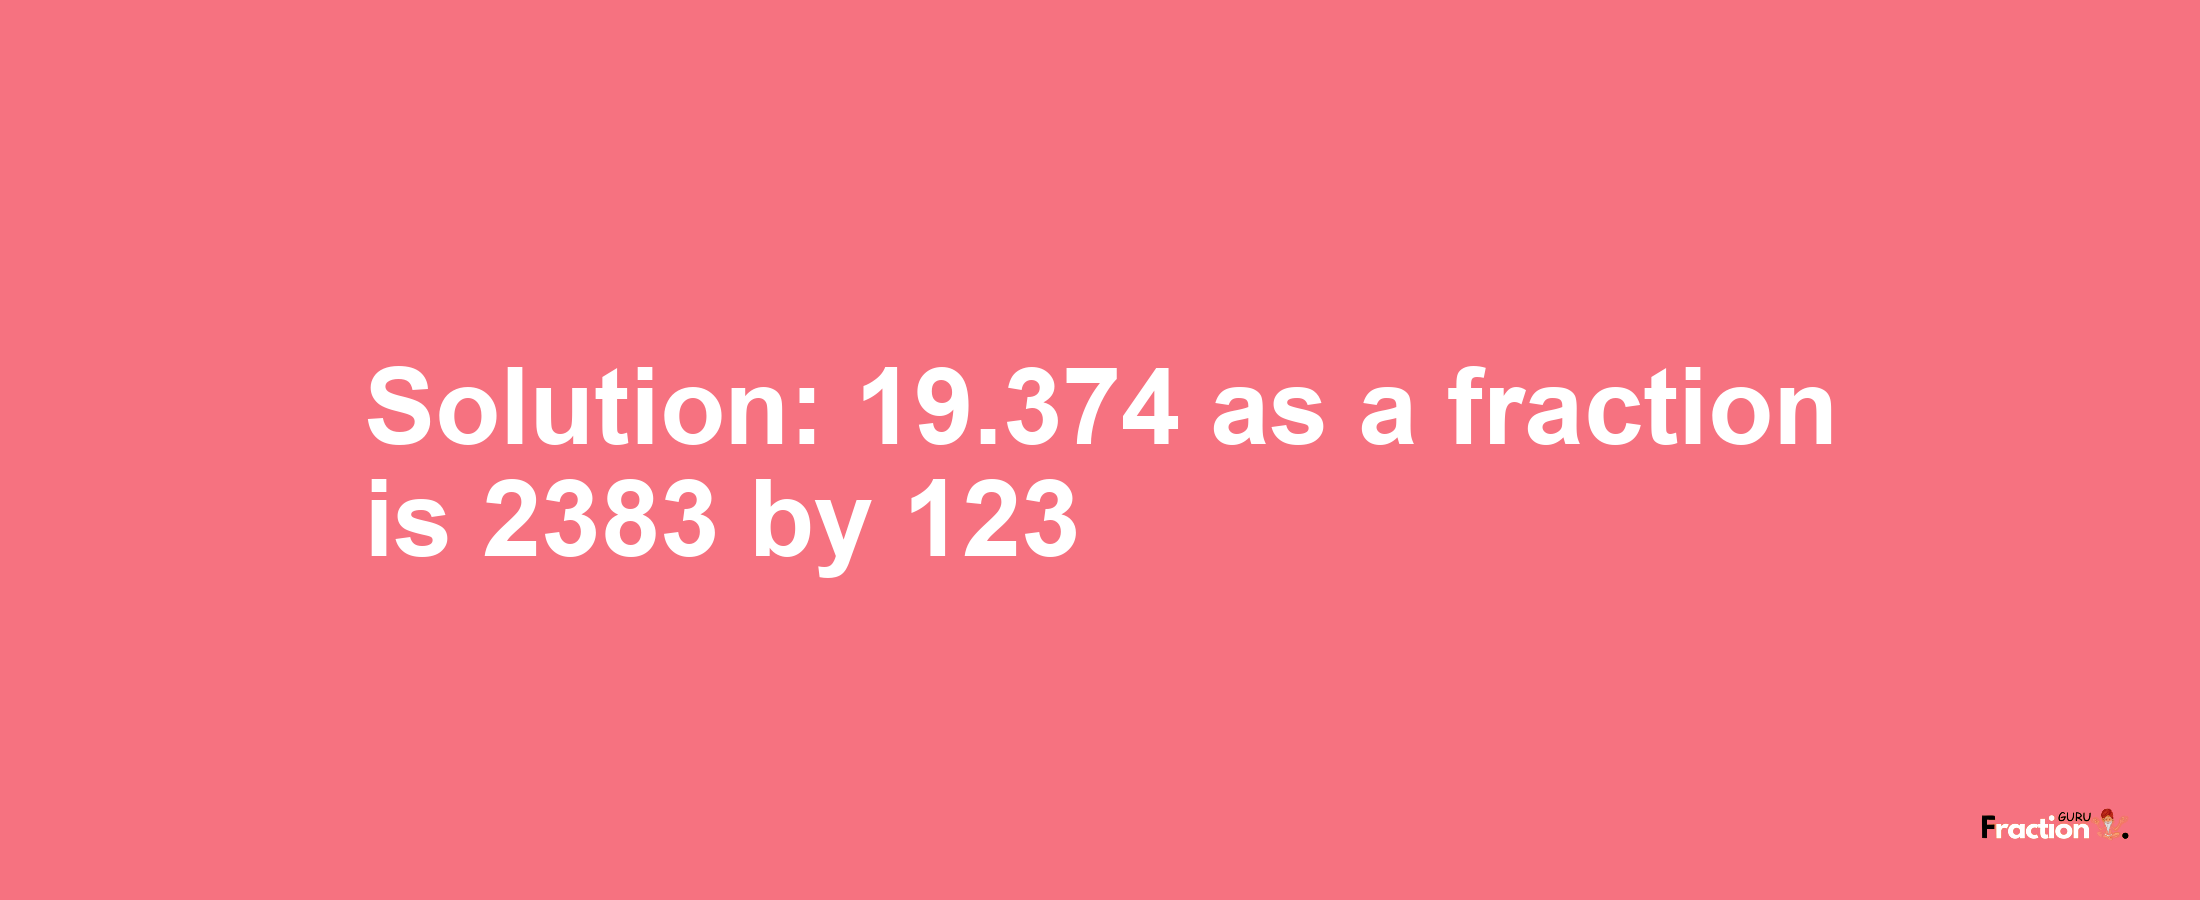 Solution:19.374 as a fraction is 2383/123